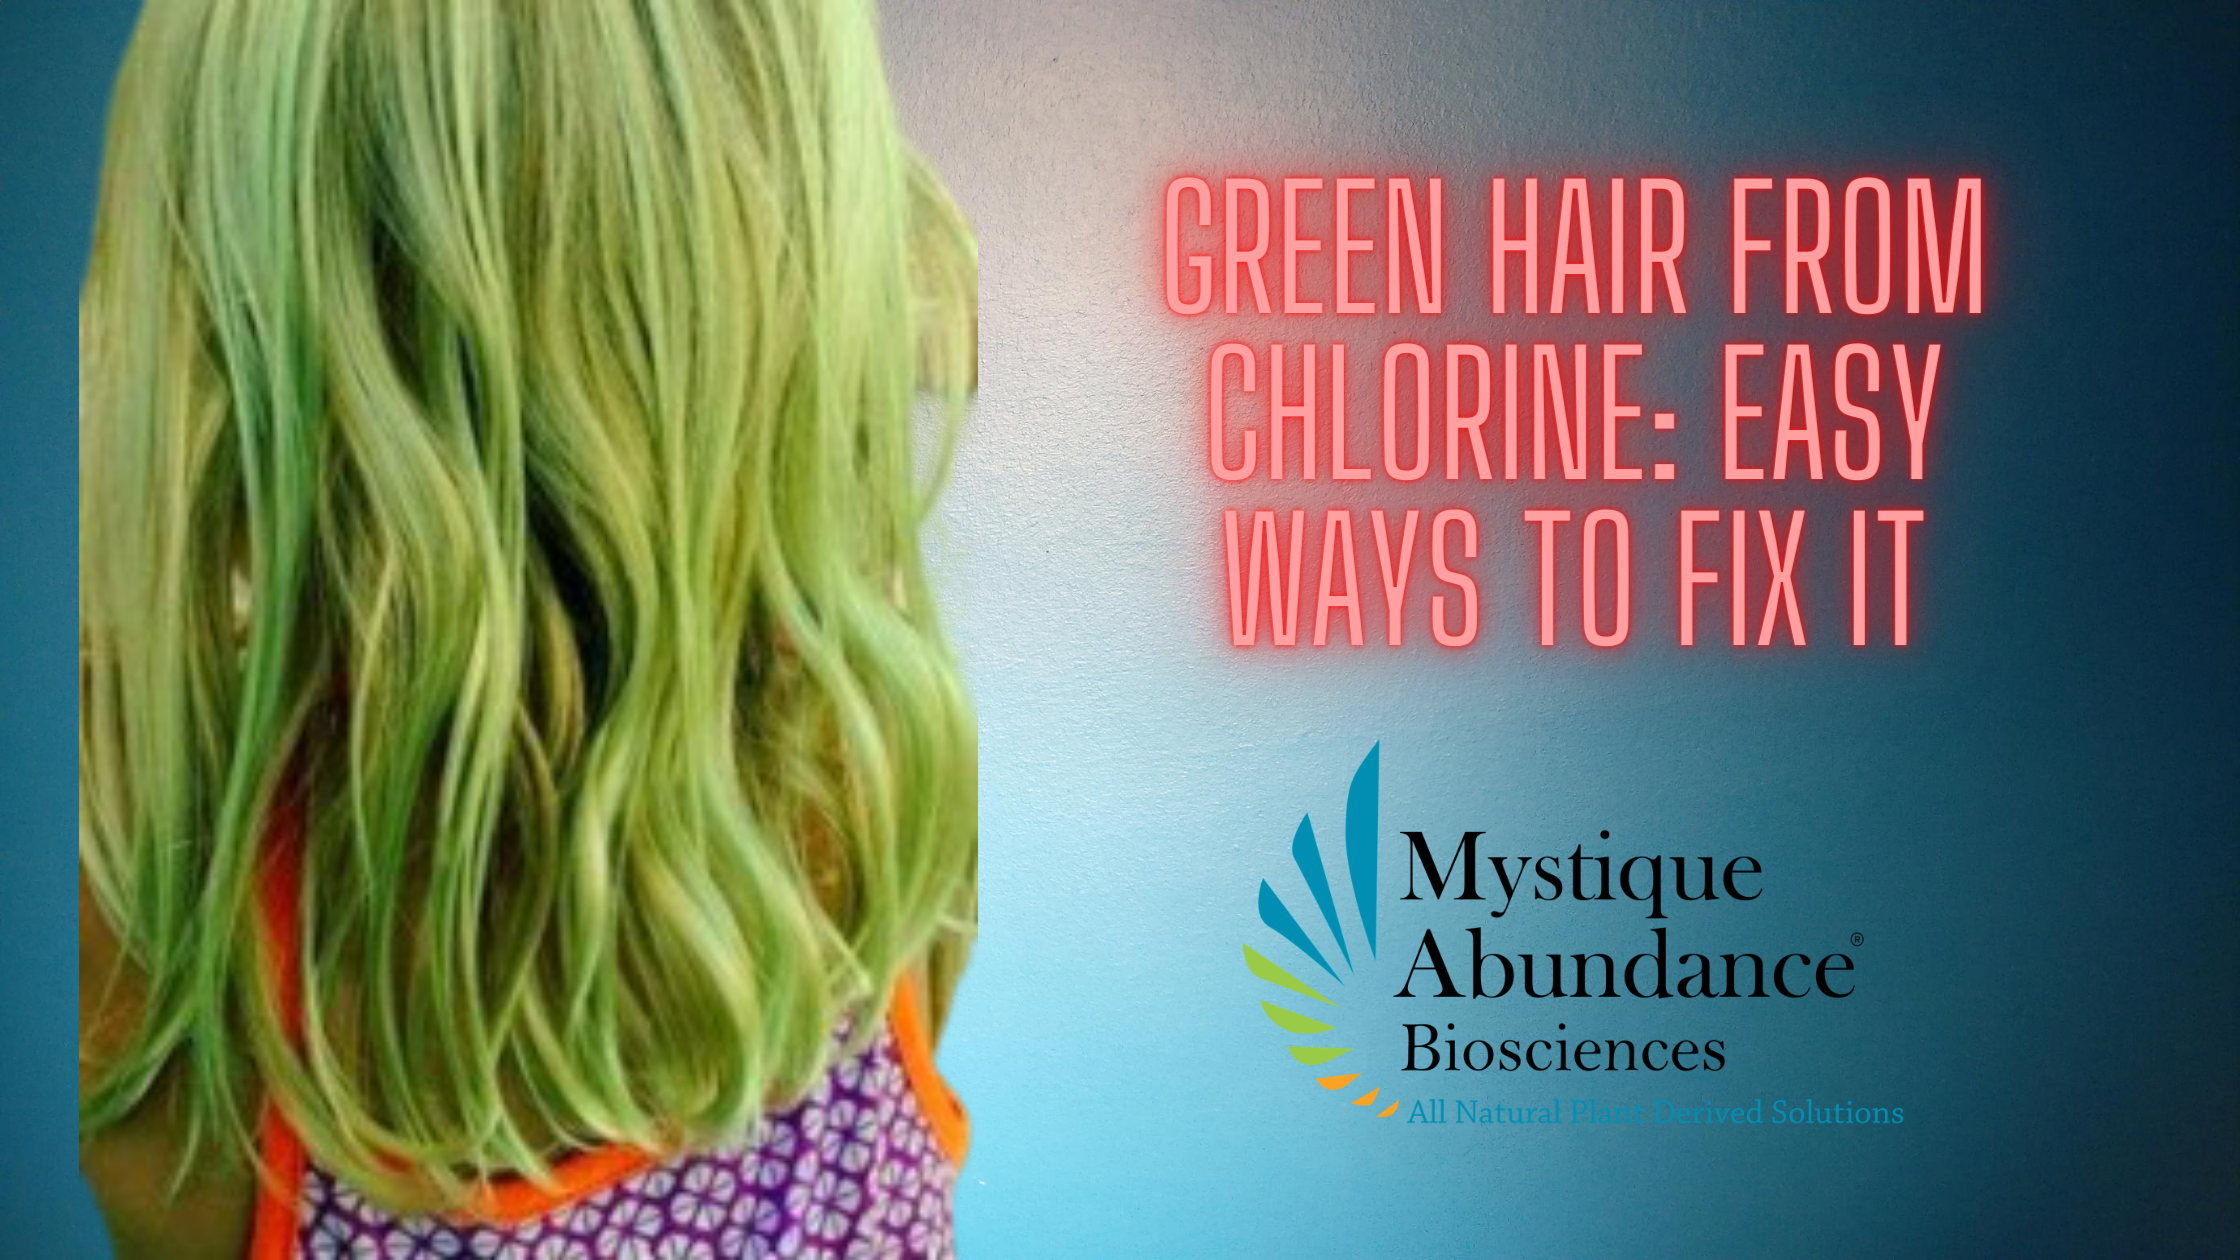 1. How to Fix Blonde Hair Tinted Green - wide 5